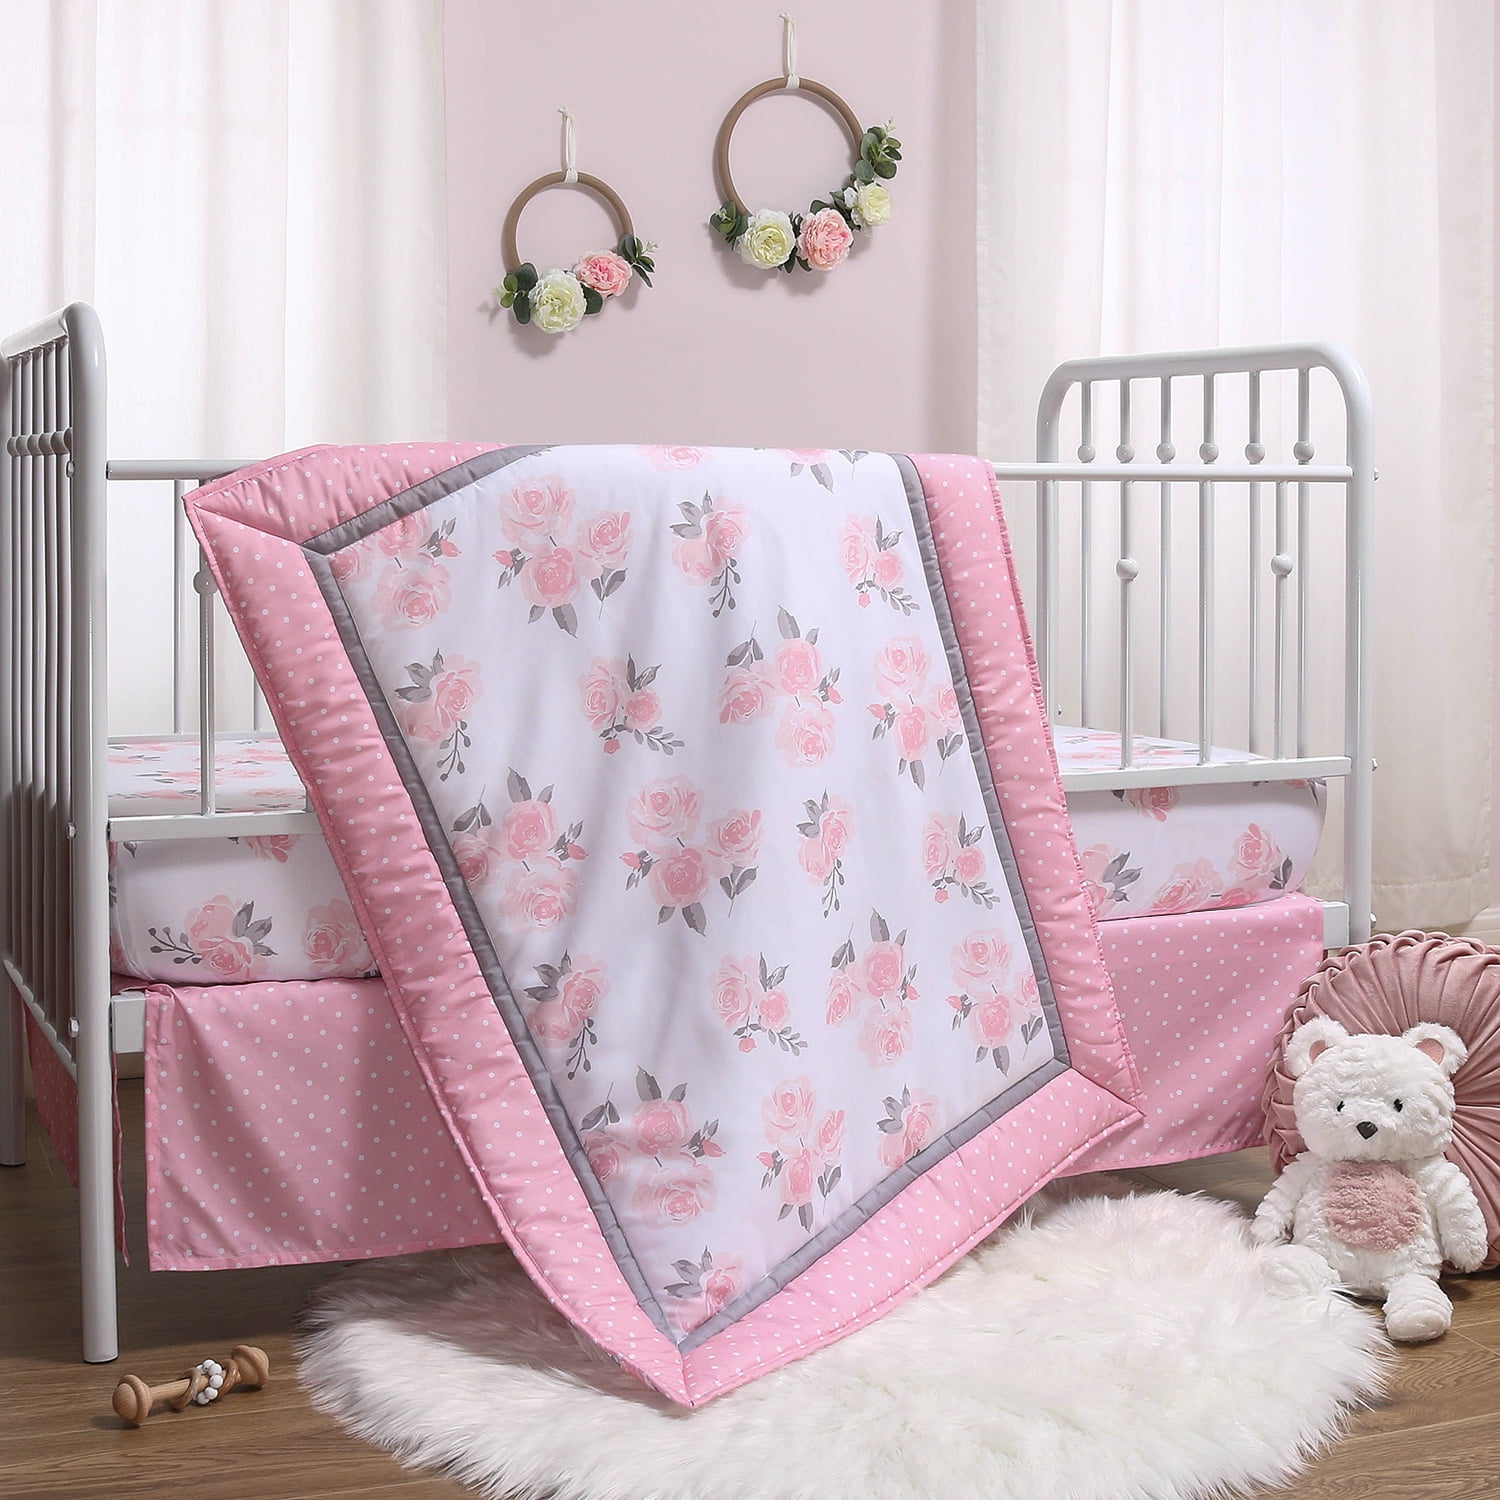 Hearts Cot Bed Bumper Quilt Baby Girl Pink 4 Tog Bedding 100% Cotton Breathable 